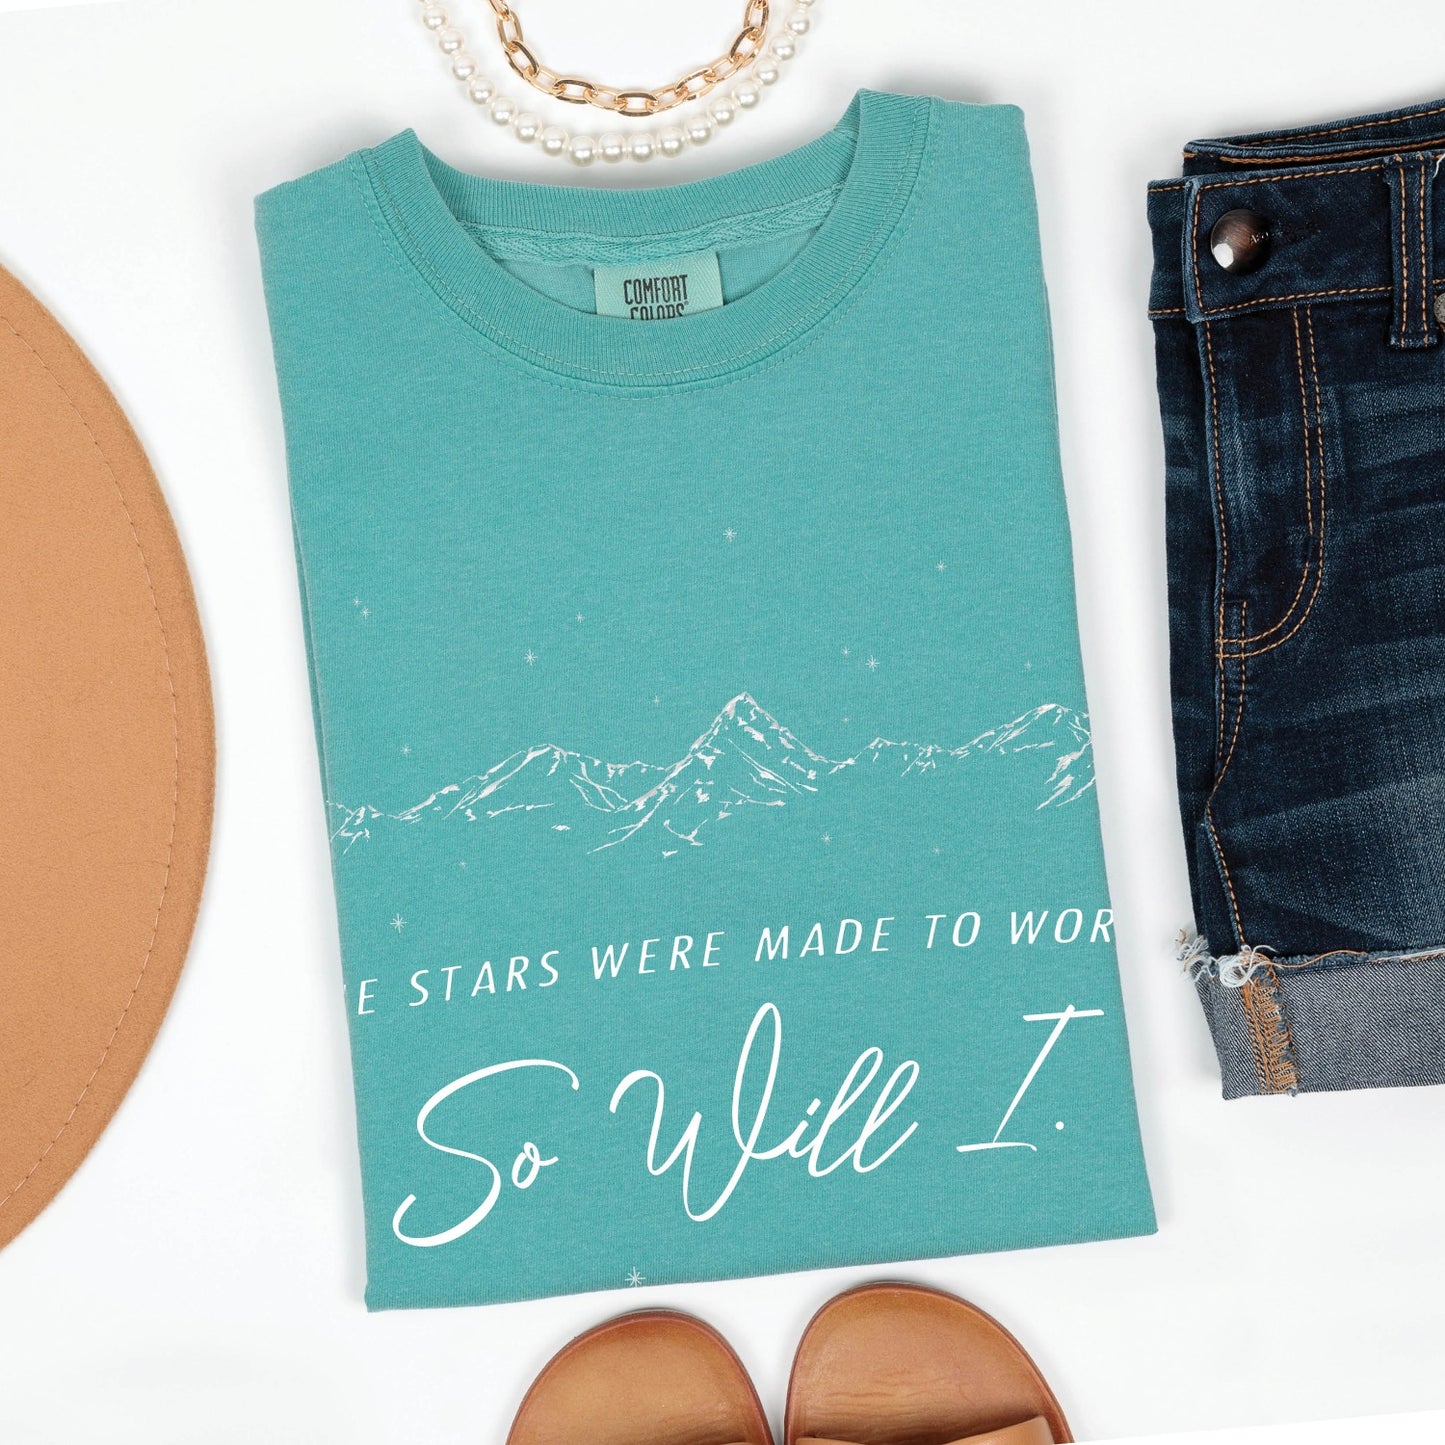 Seafoam teal color Christian unisex Comfort Colors 1717 t-shirt with a white hand-drawn mountain range and starry sky that says this faith-based bible verse quote, "If the Stars Were Made to Worship So Will I", created for men and women Kingdom believers